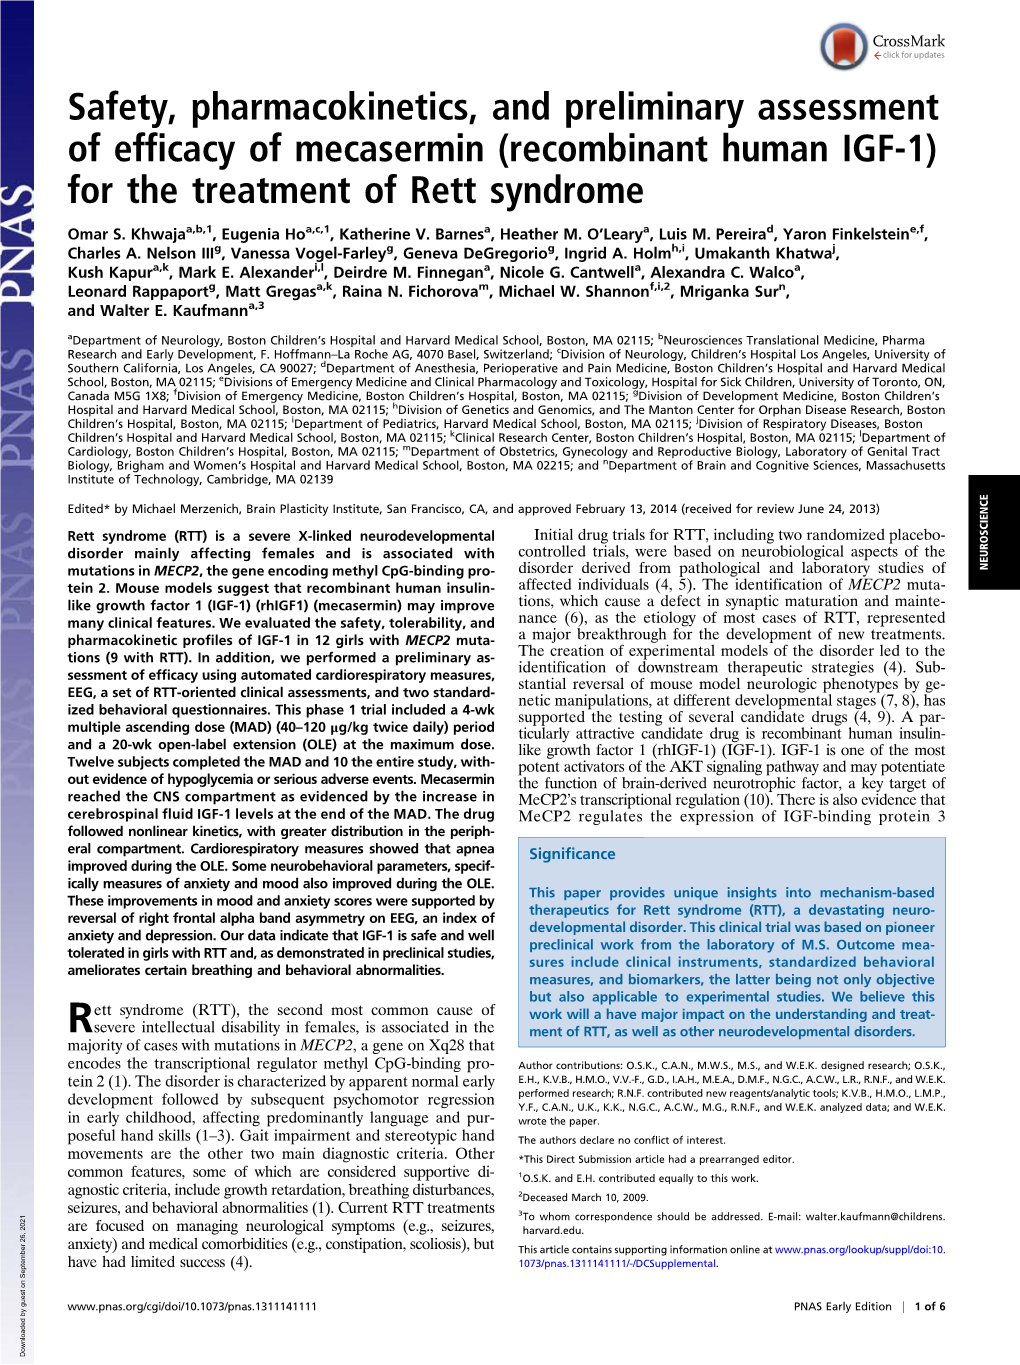 Recombinant Human IGF-1) for the Treatment of Rett Syndrome